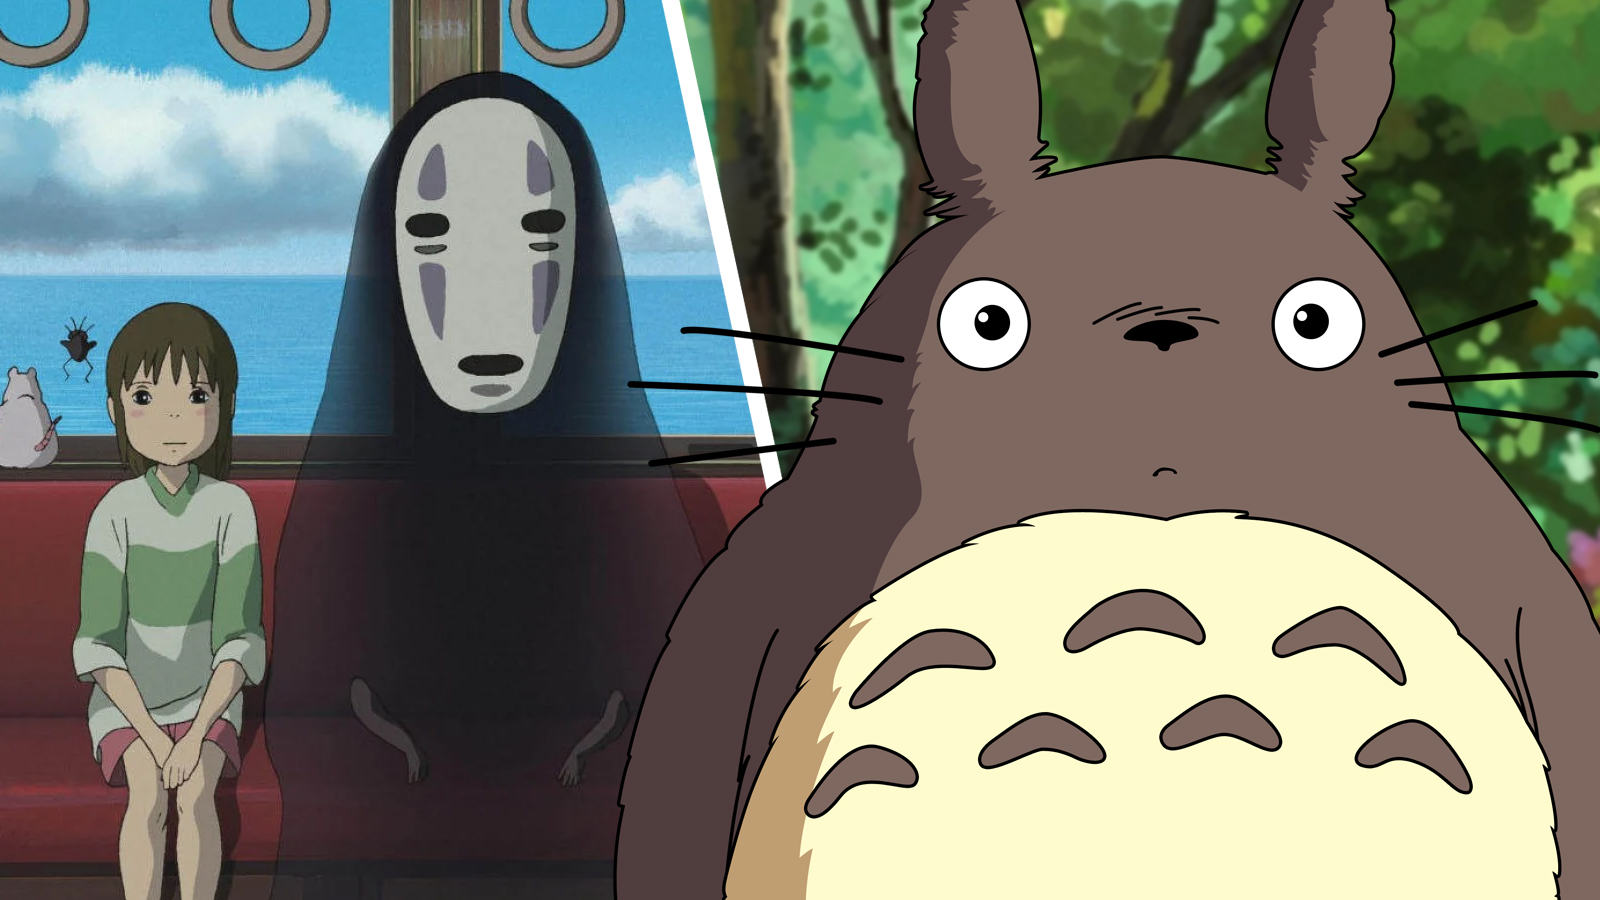 Studio Ghibli Finds the True, the Good and the Beautiful